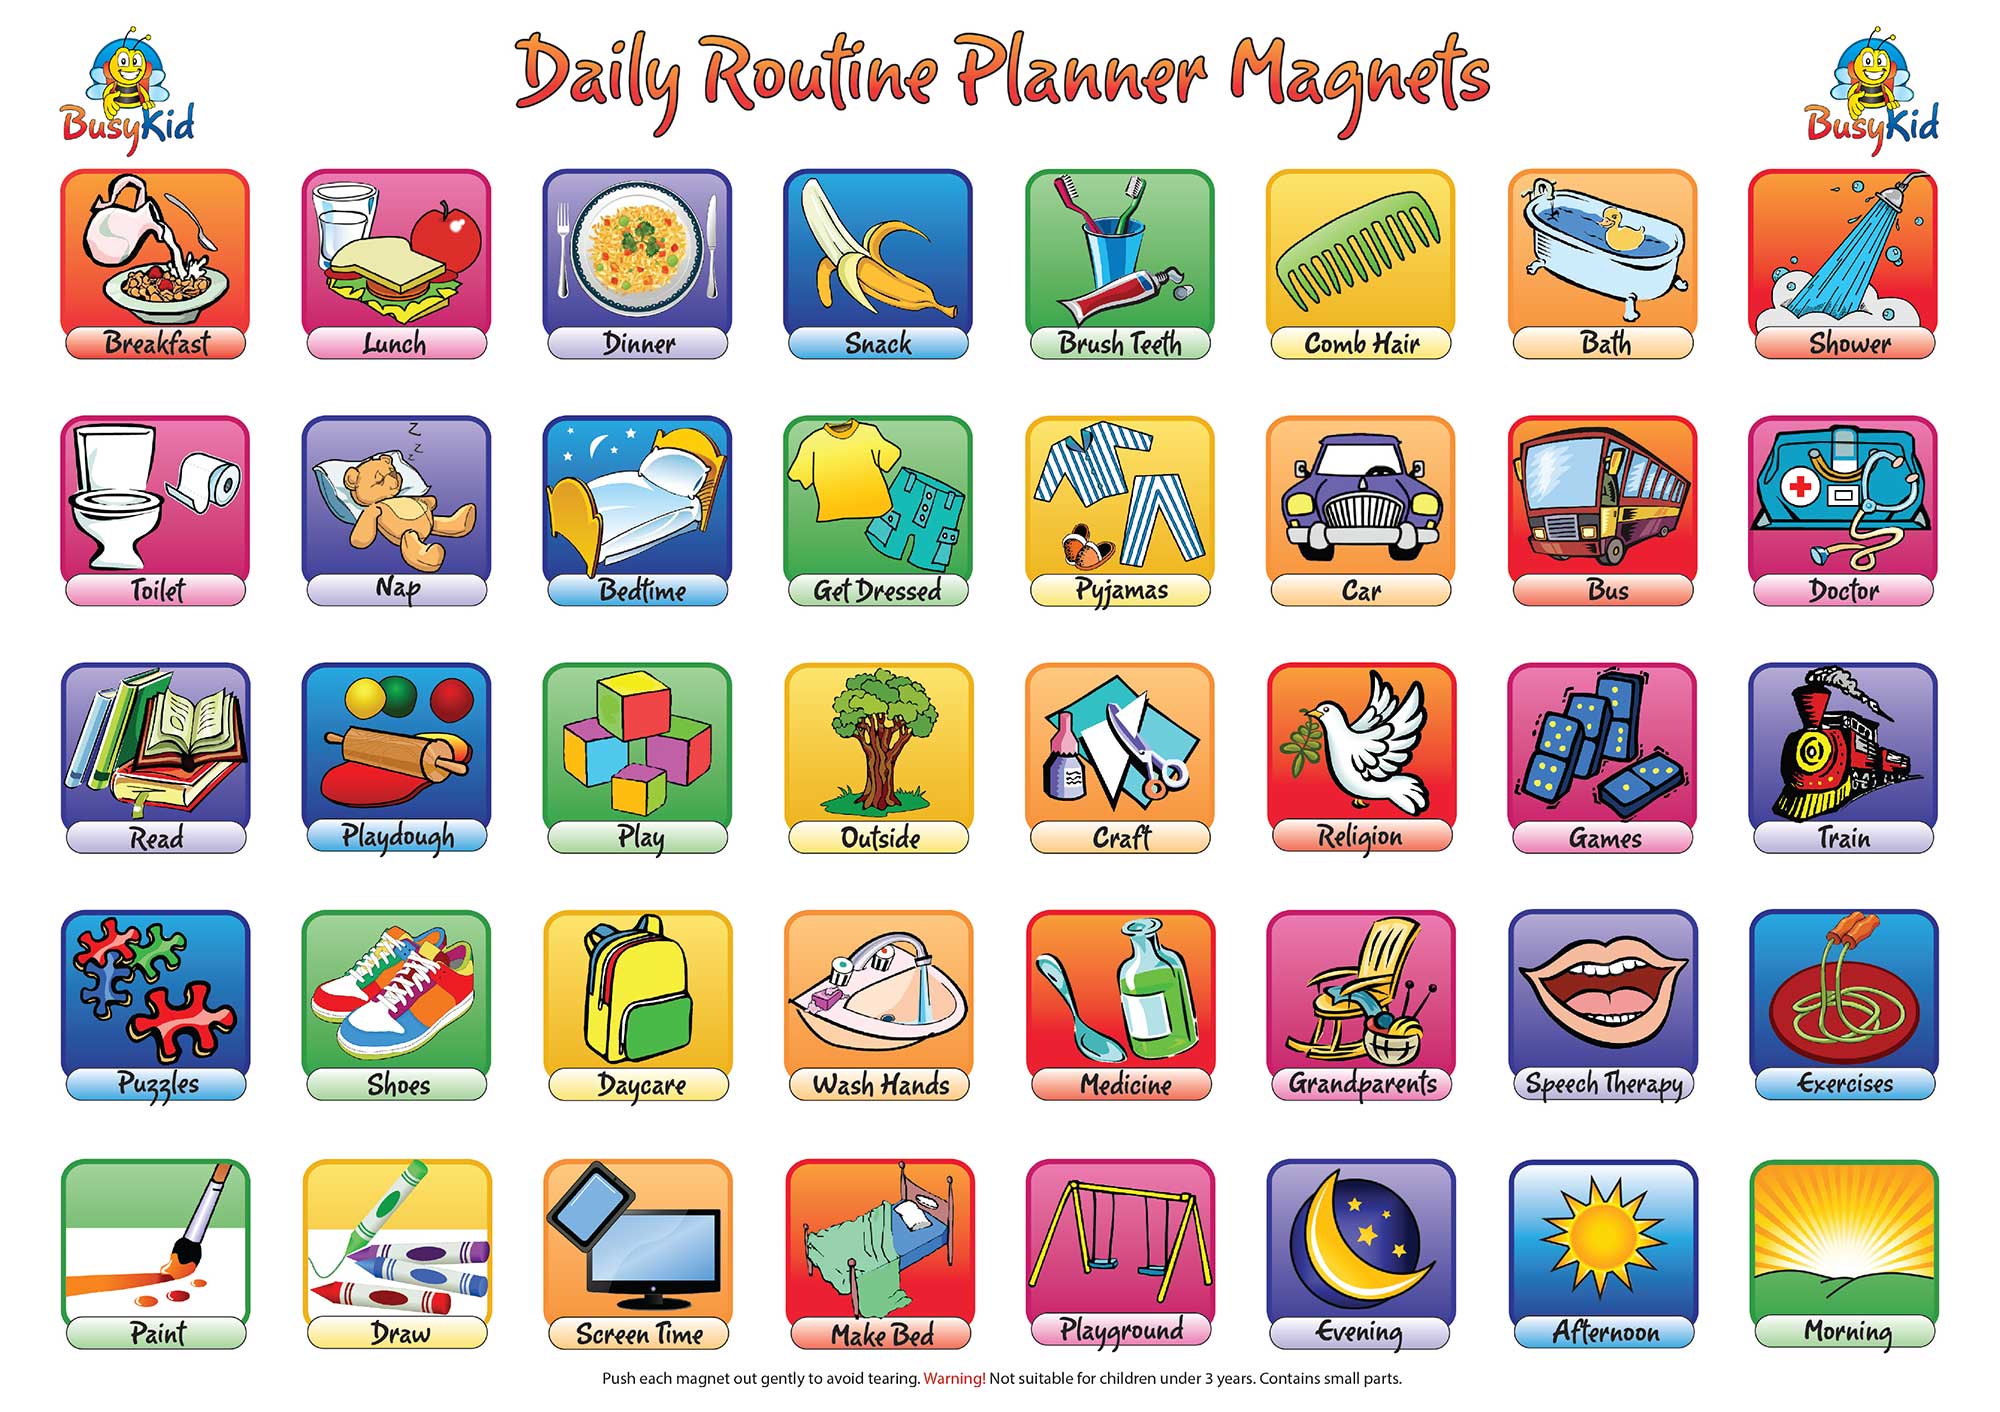 Daily routines wordwall. Английский Daily Routine. Картинки на тему Daily Routine. Карточки Daily Routine. Карточки everyday Routine.